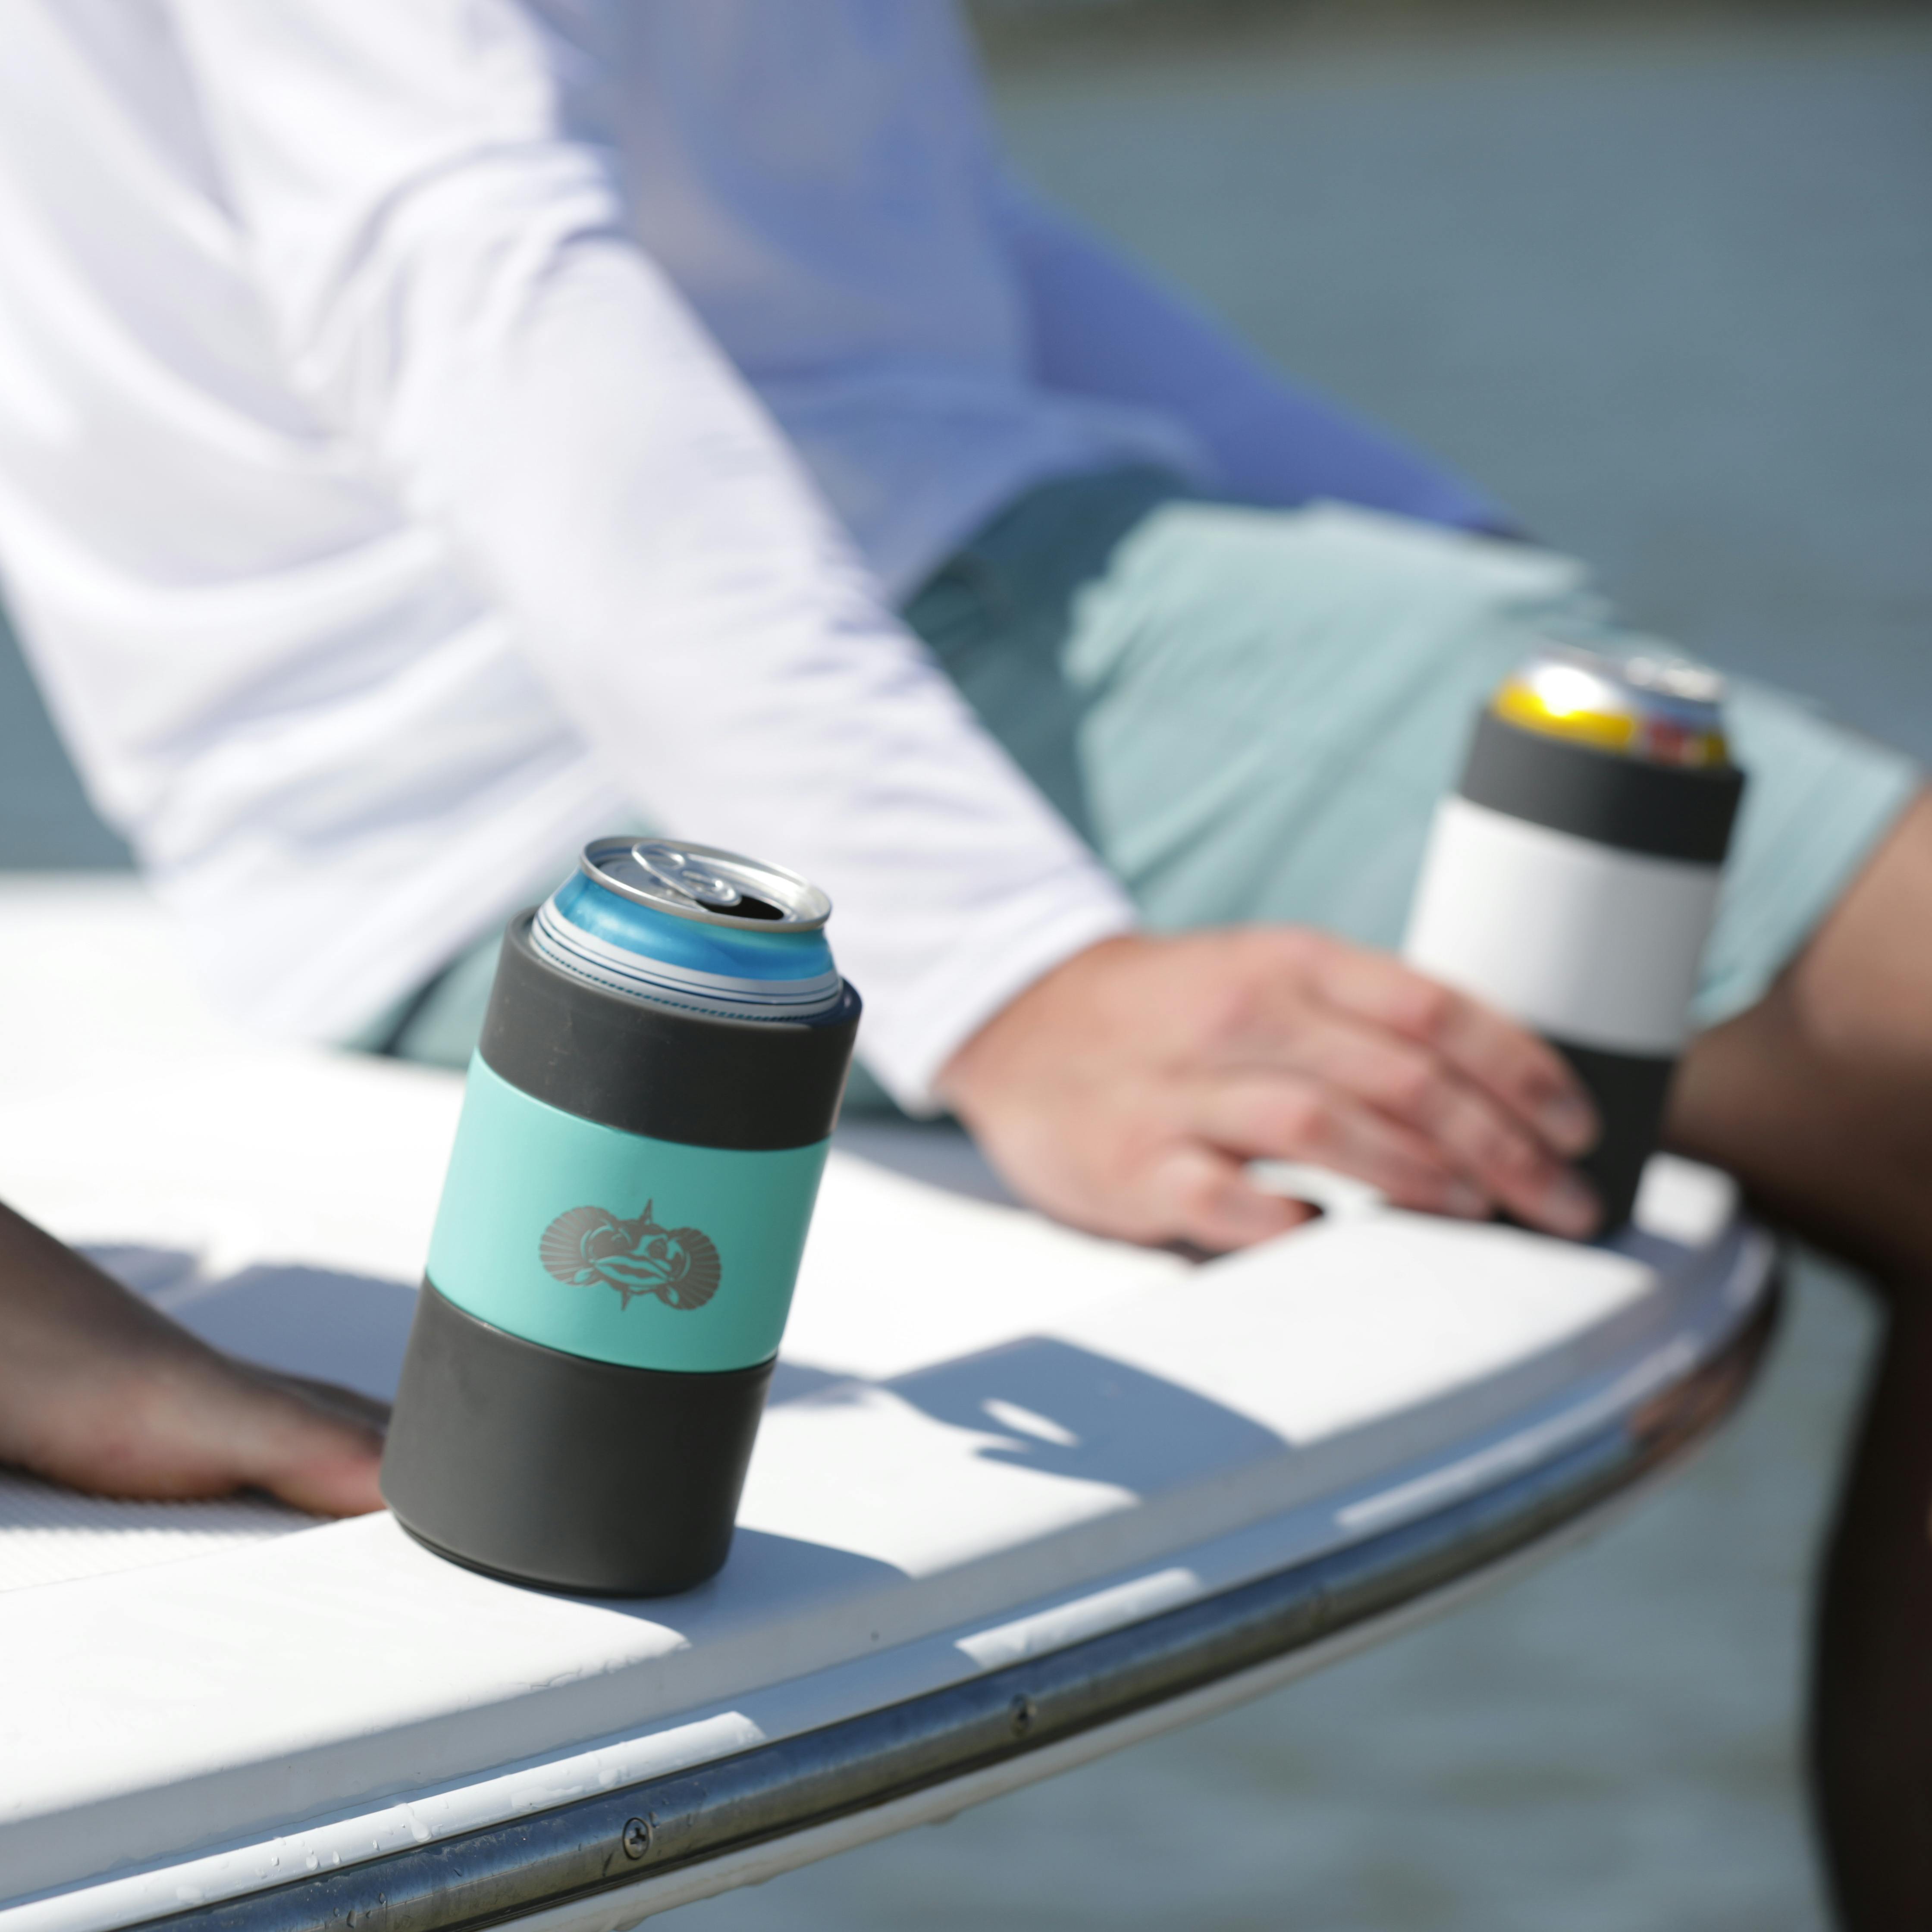 Toadfish Outfitters The Non-Tipping Can Cooler